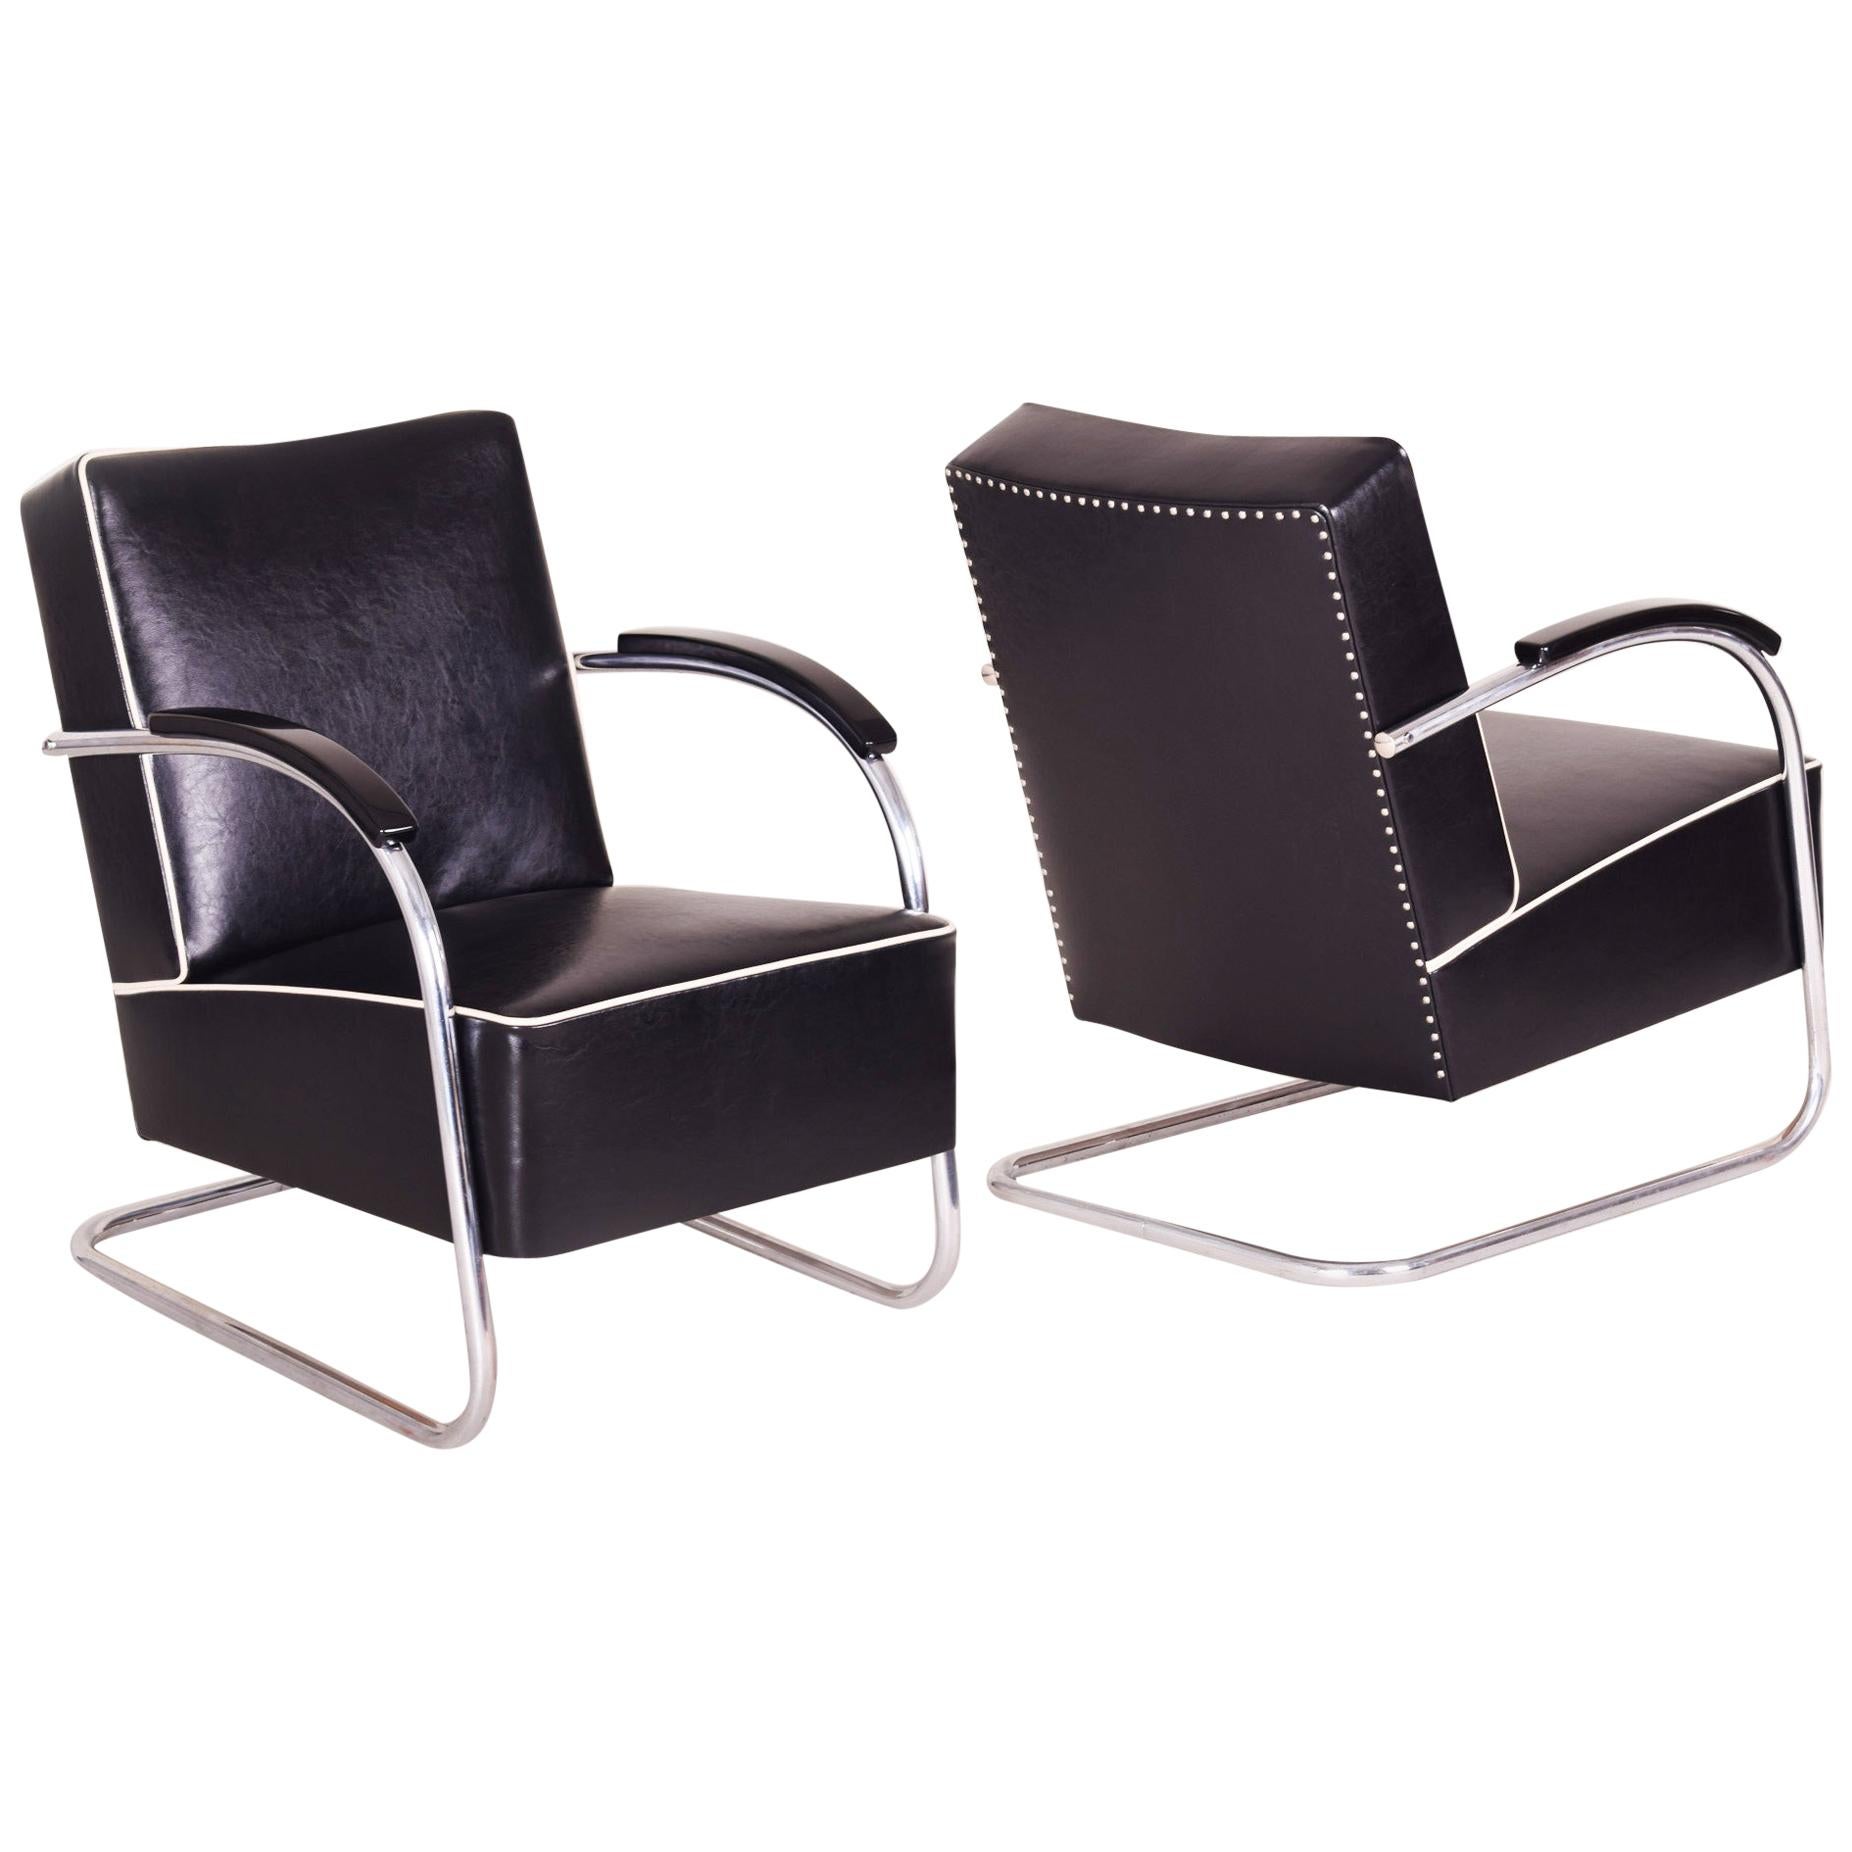 Pair of Black Tubular Steel Cantilever Armchairs, Chrome, New Upholstery, 1930s